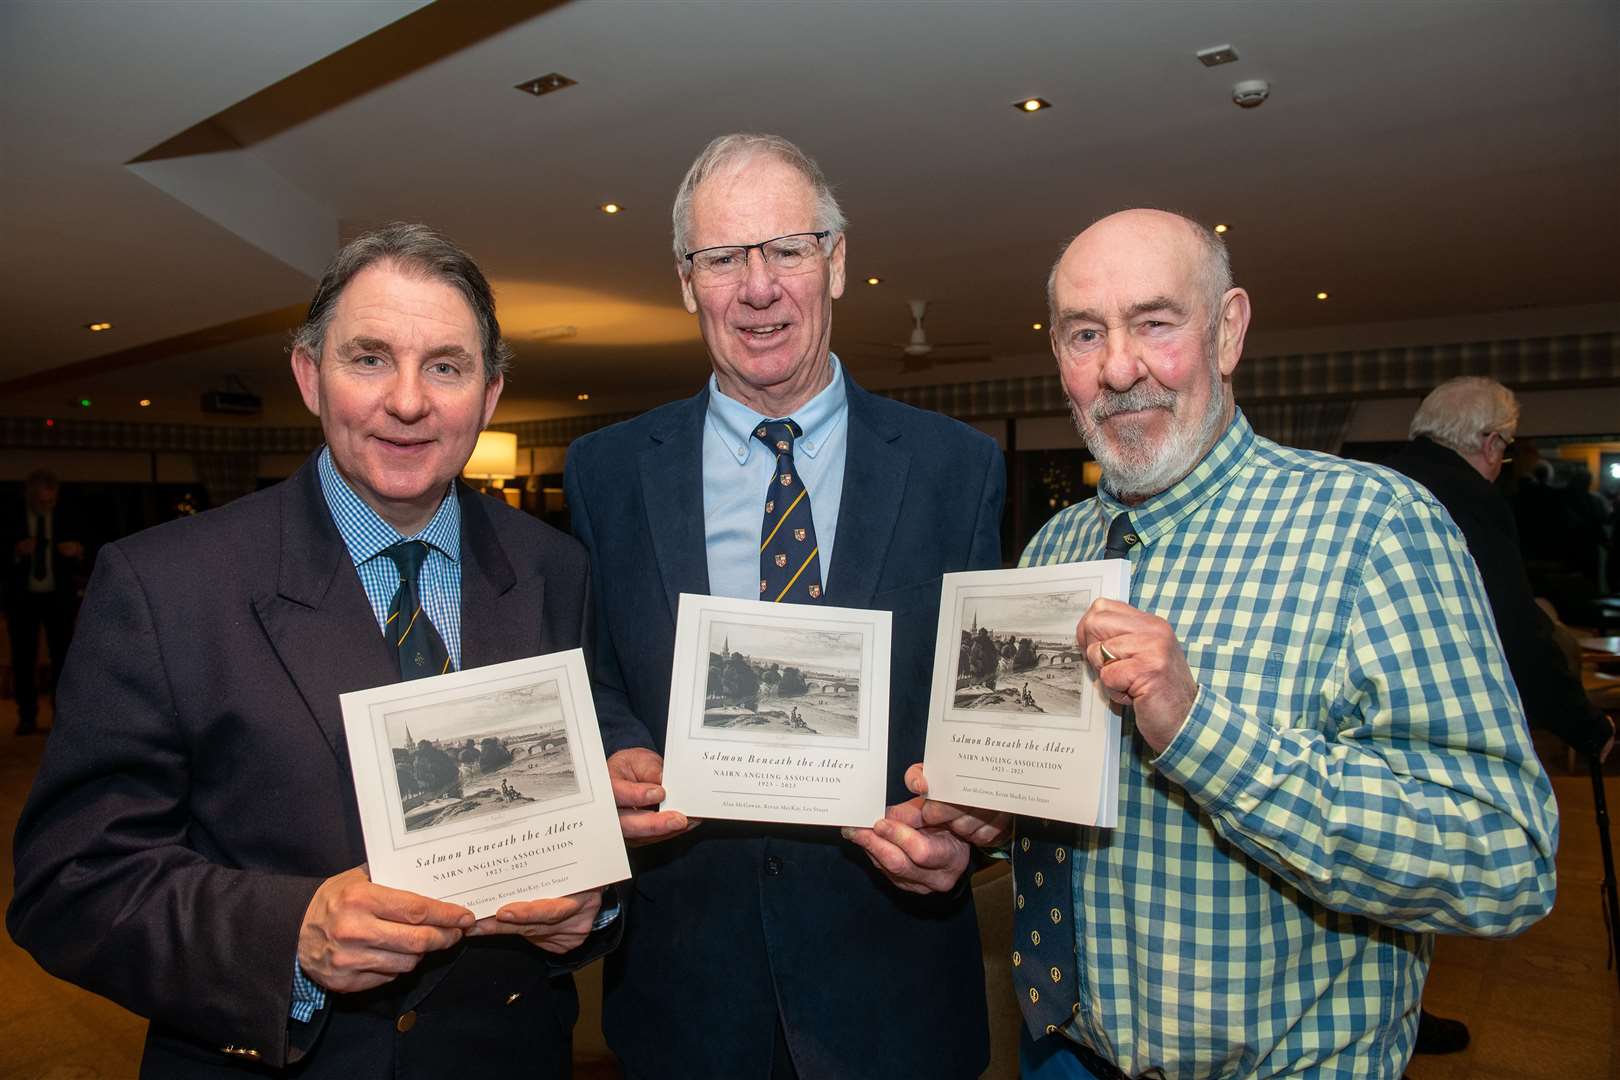 The three authors at the book launch (from left): Alan McGowan, Les Stuart, Kevan MacKay. Picture: Ian MacRae.